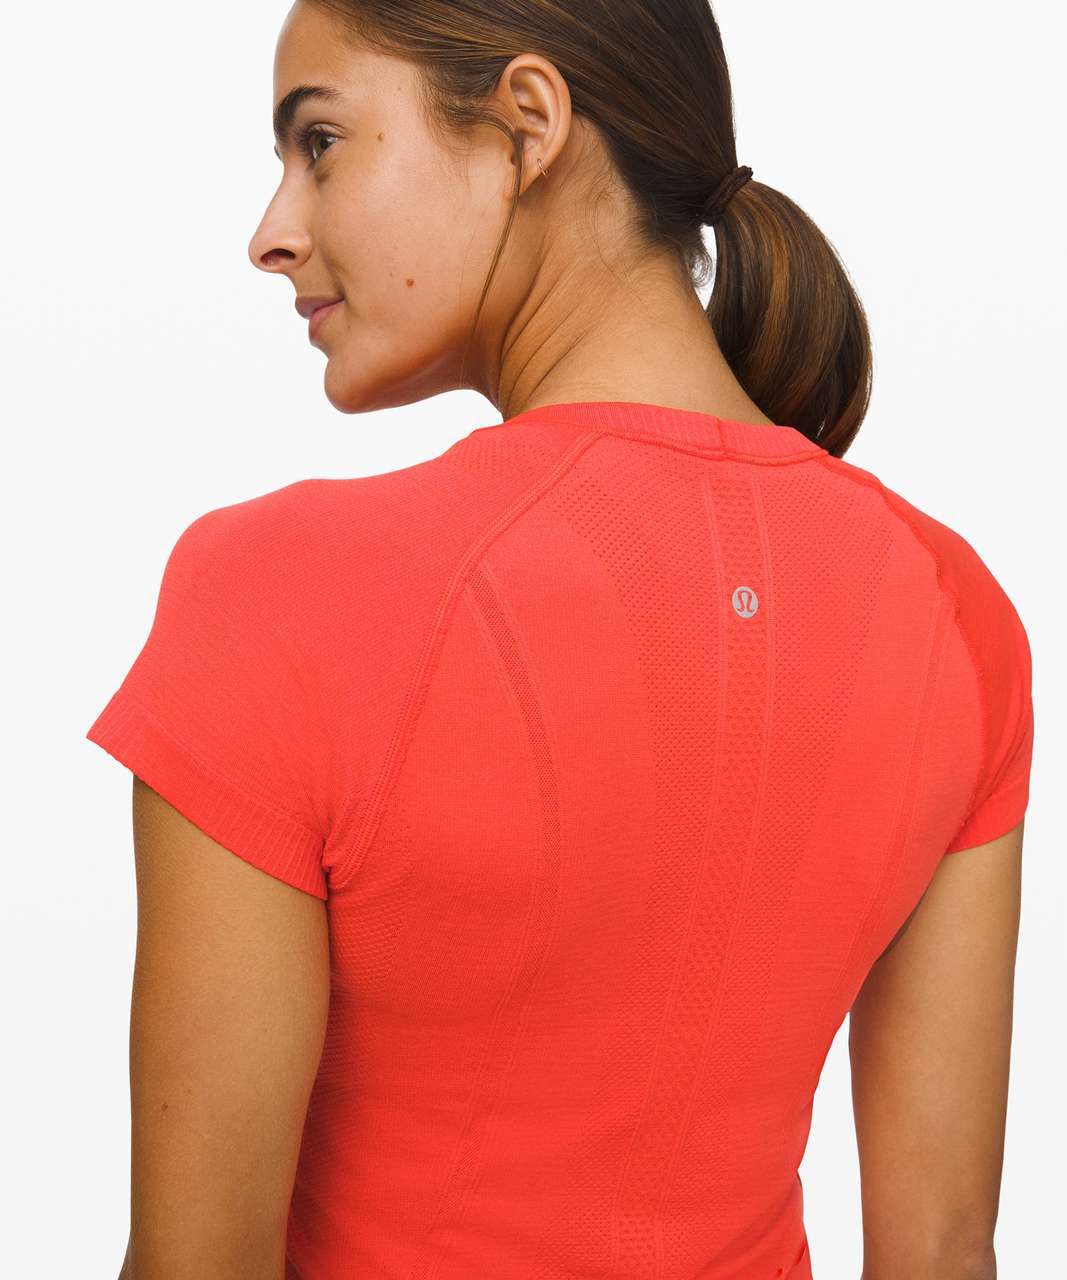 Lululemon Swiftly Tech Short Sleeve Crew - Thermal Red / Thermal Red